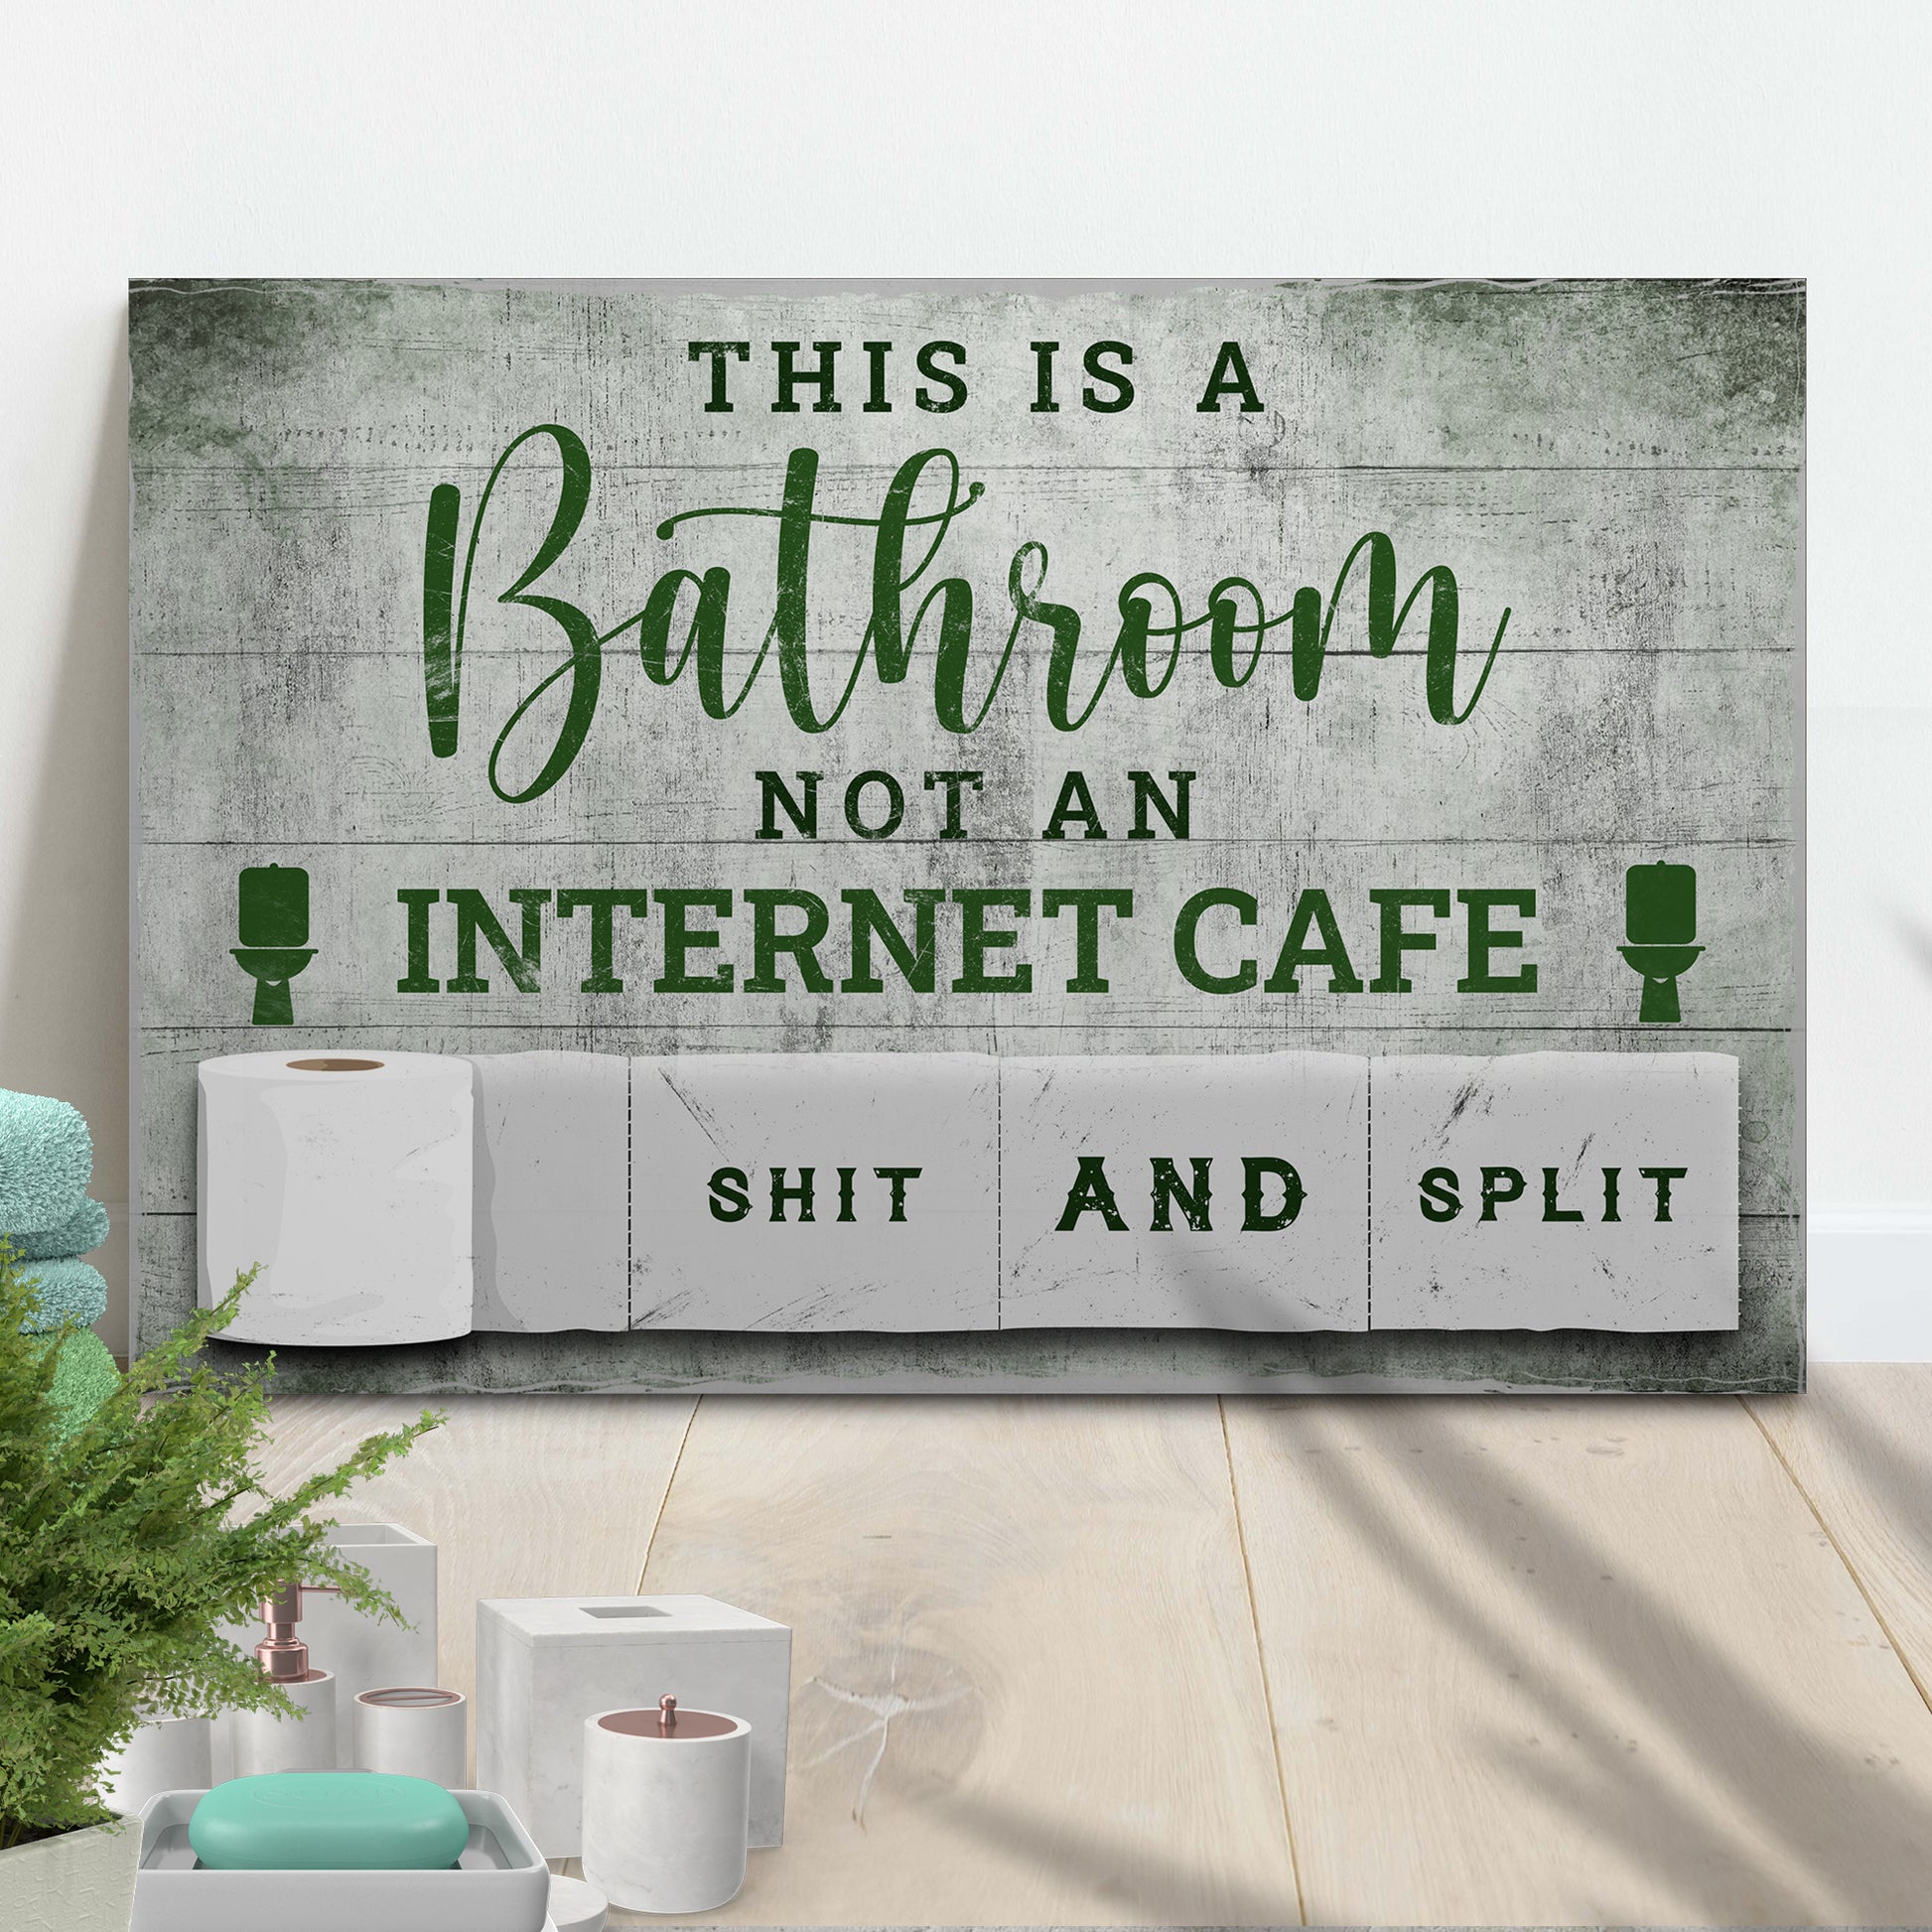 This Is A Bathroom Not An Internet Cafe Sign - Image by Tailored Canvases